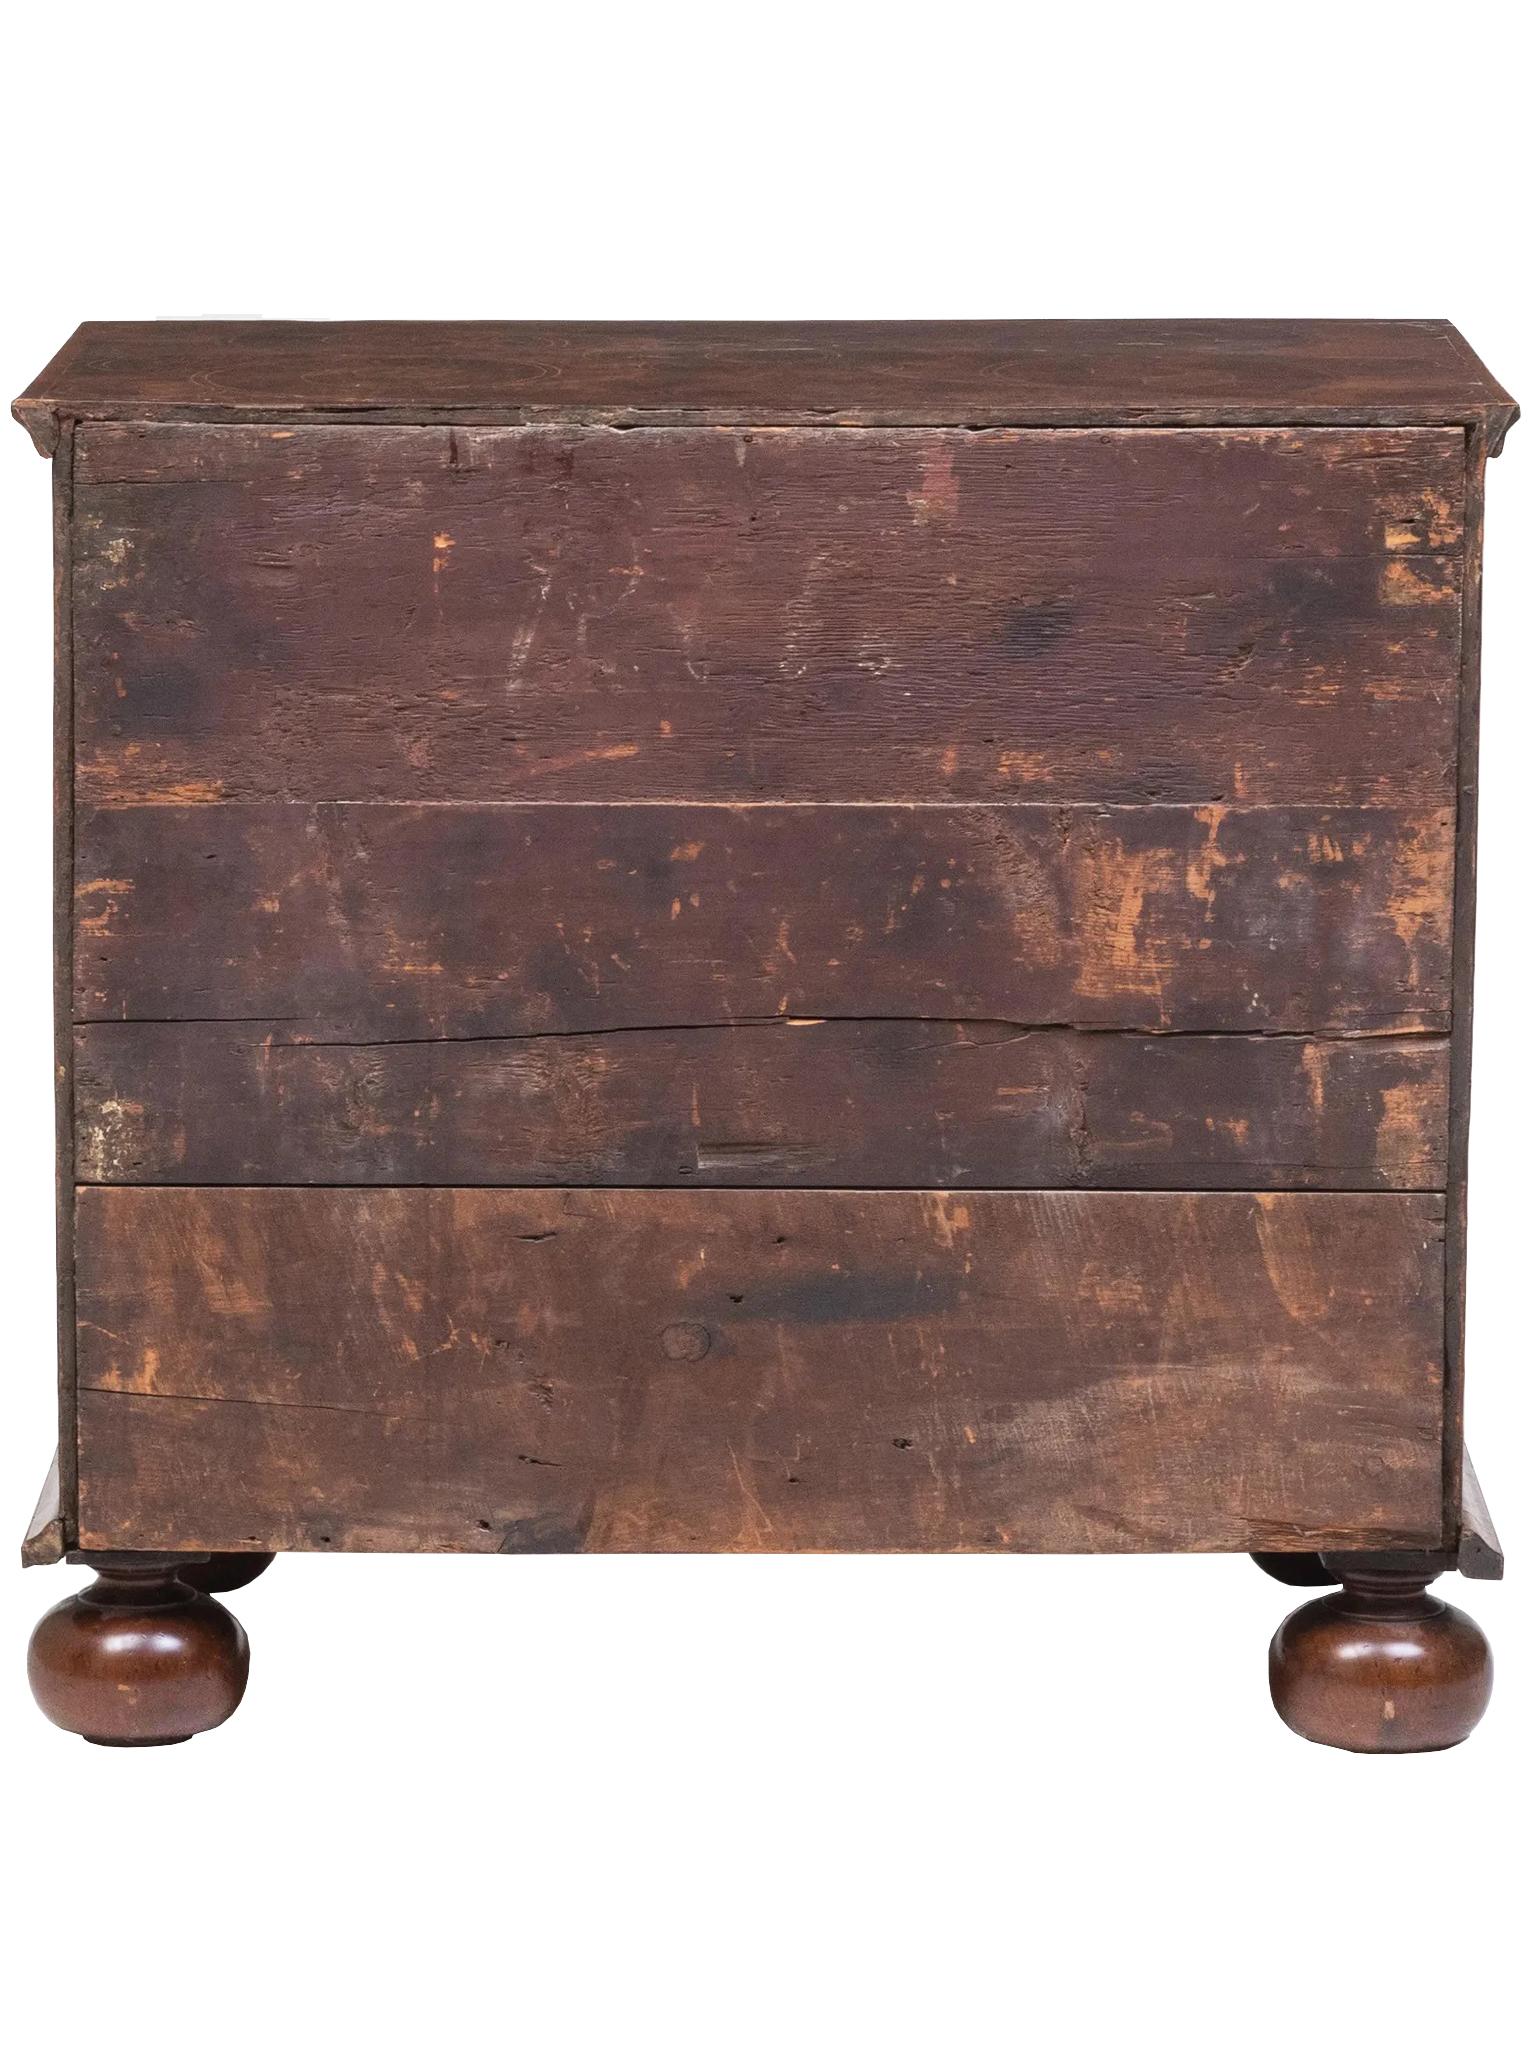 18th Century William & Mary Chest of Drawers with Oyster Inlays 6